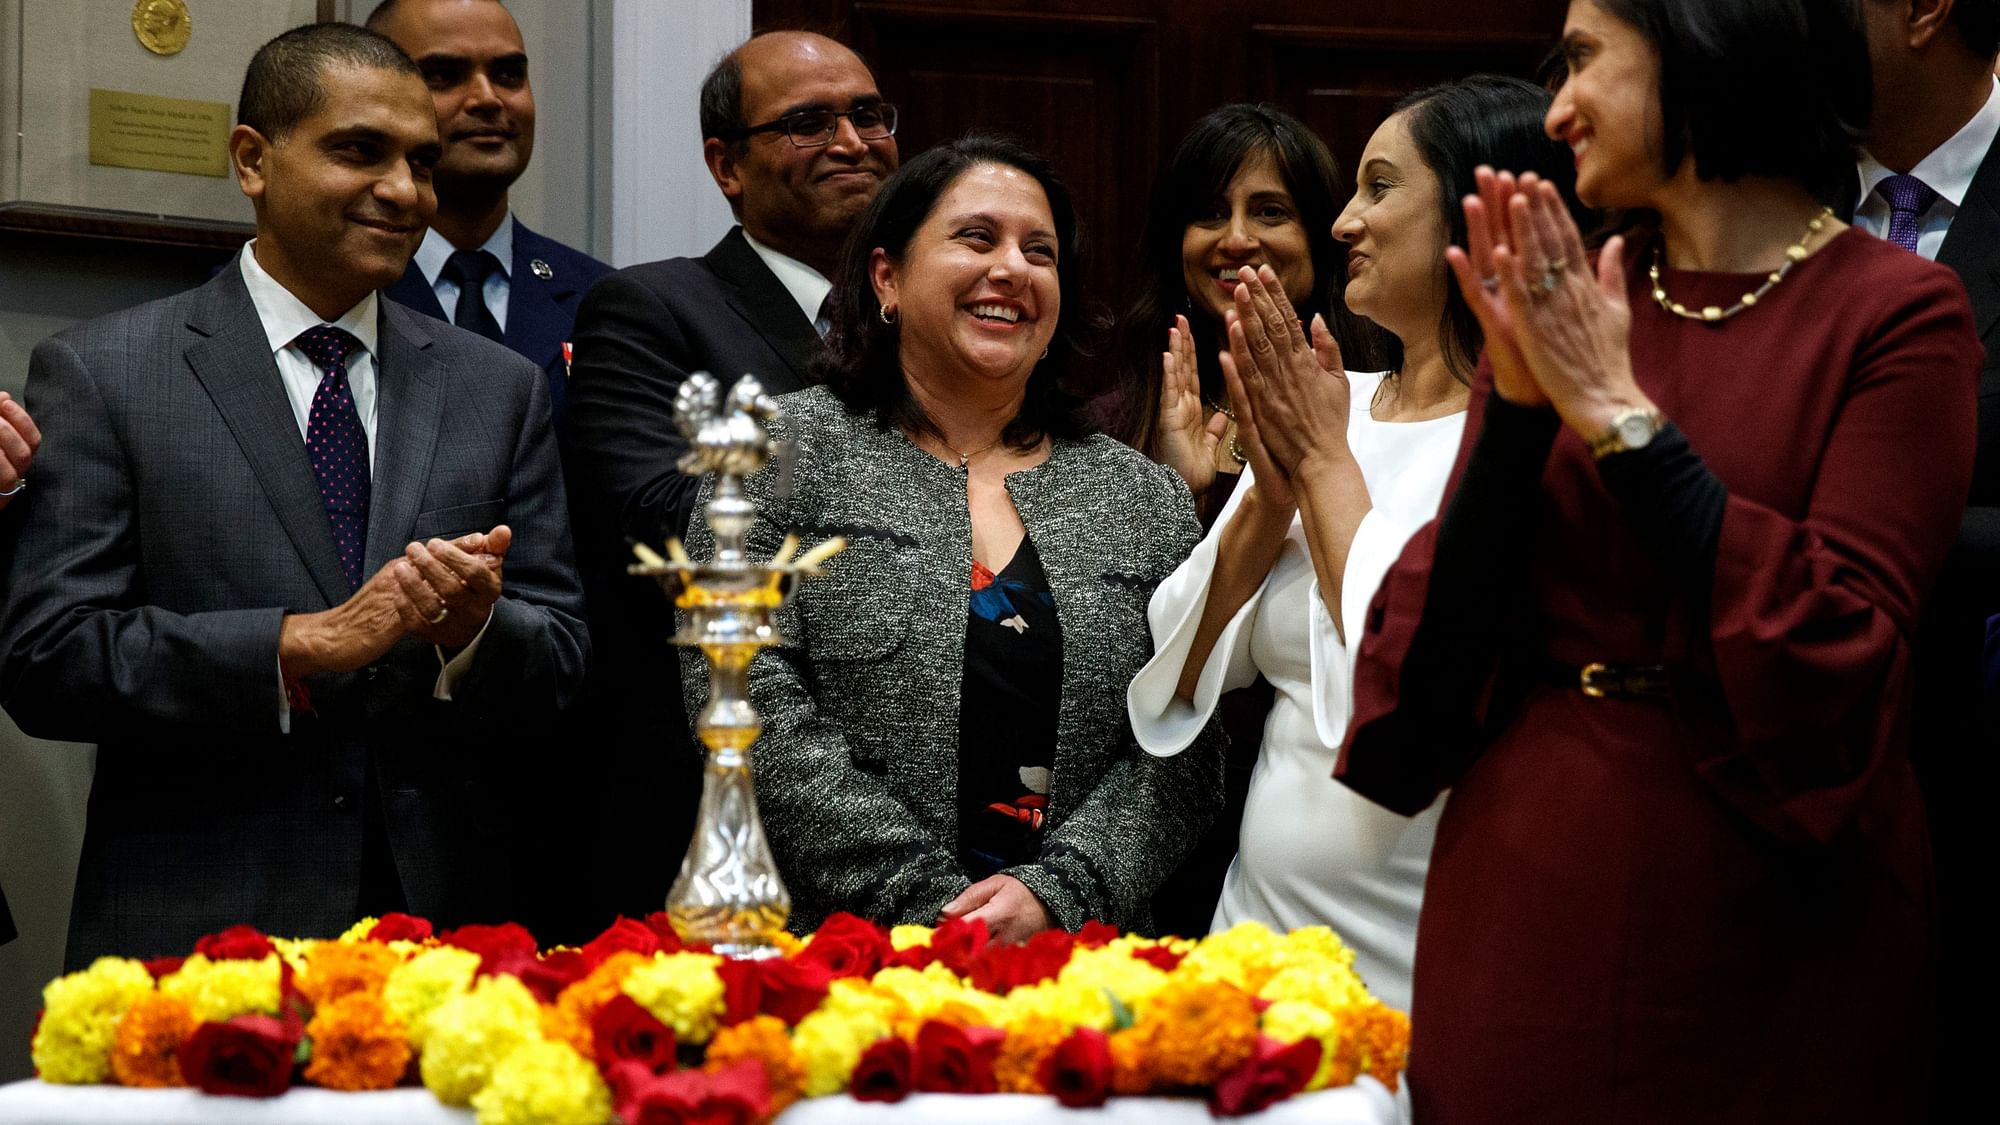  Neomi Rao smiles as US President Donald Trump announces his intention to nominate her to fill Brett Kavanaugh’s seat on the US Court of Appeals for the DC Circuit.&nbsp;